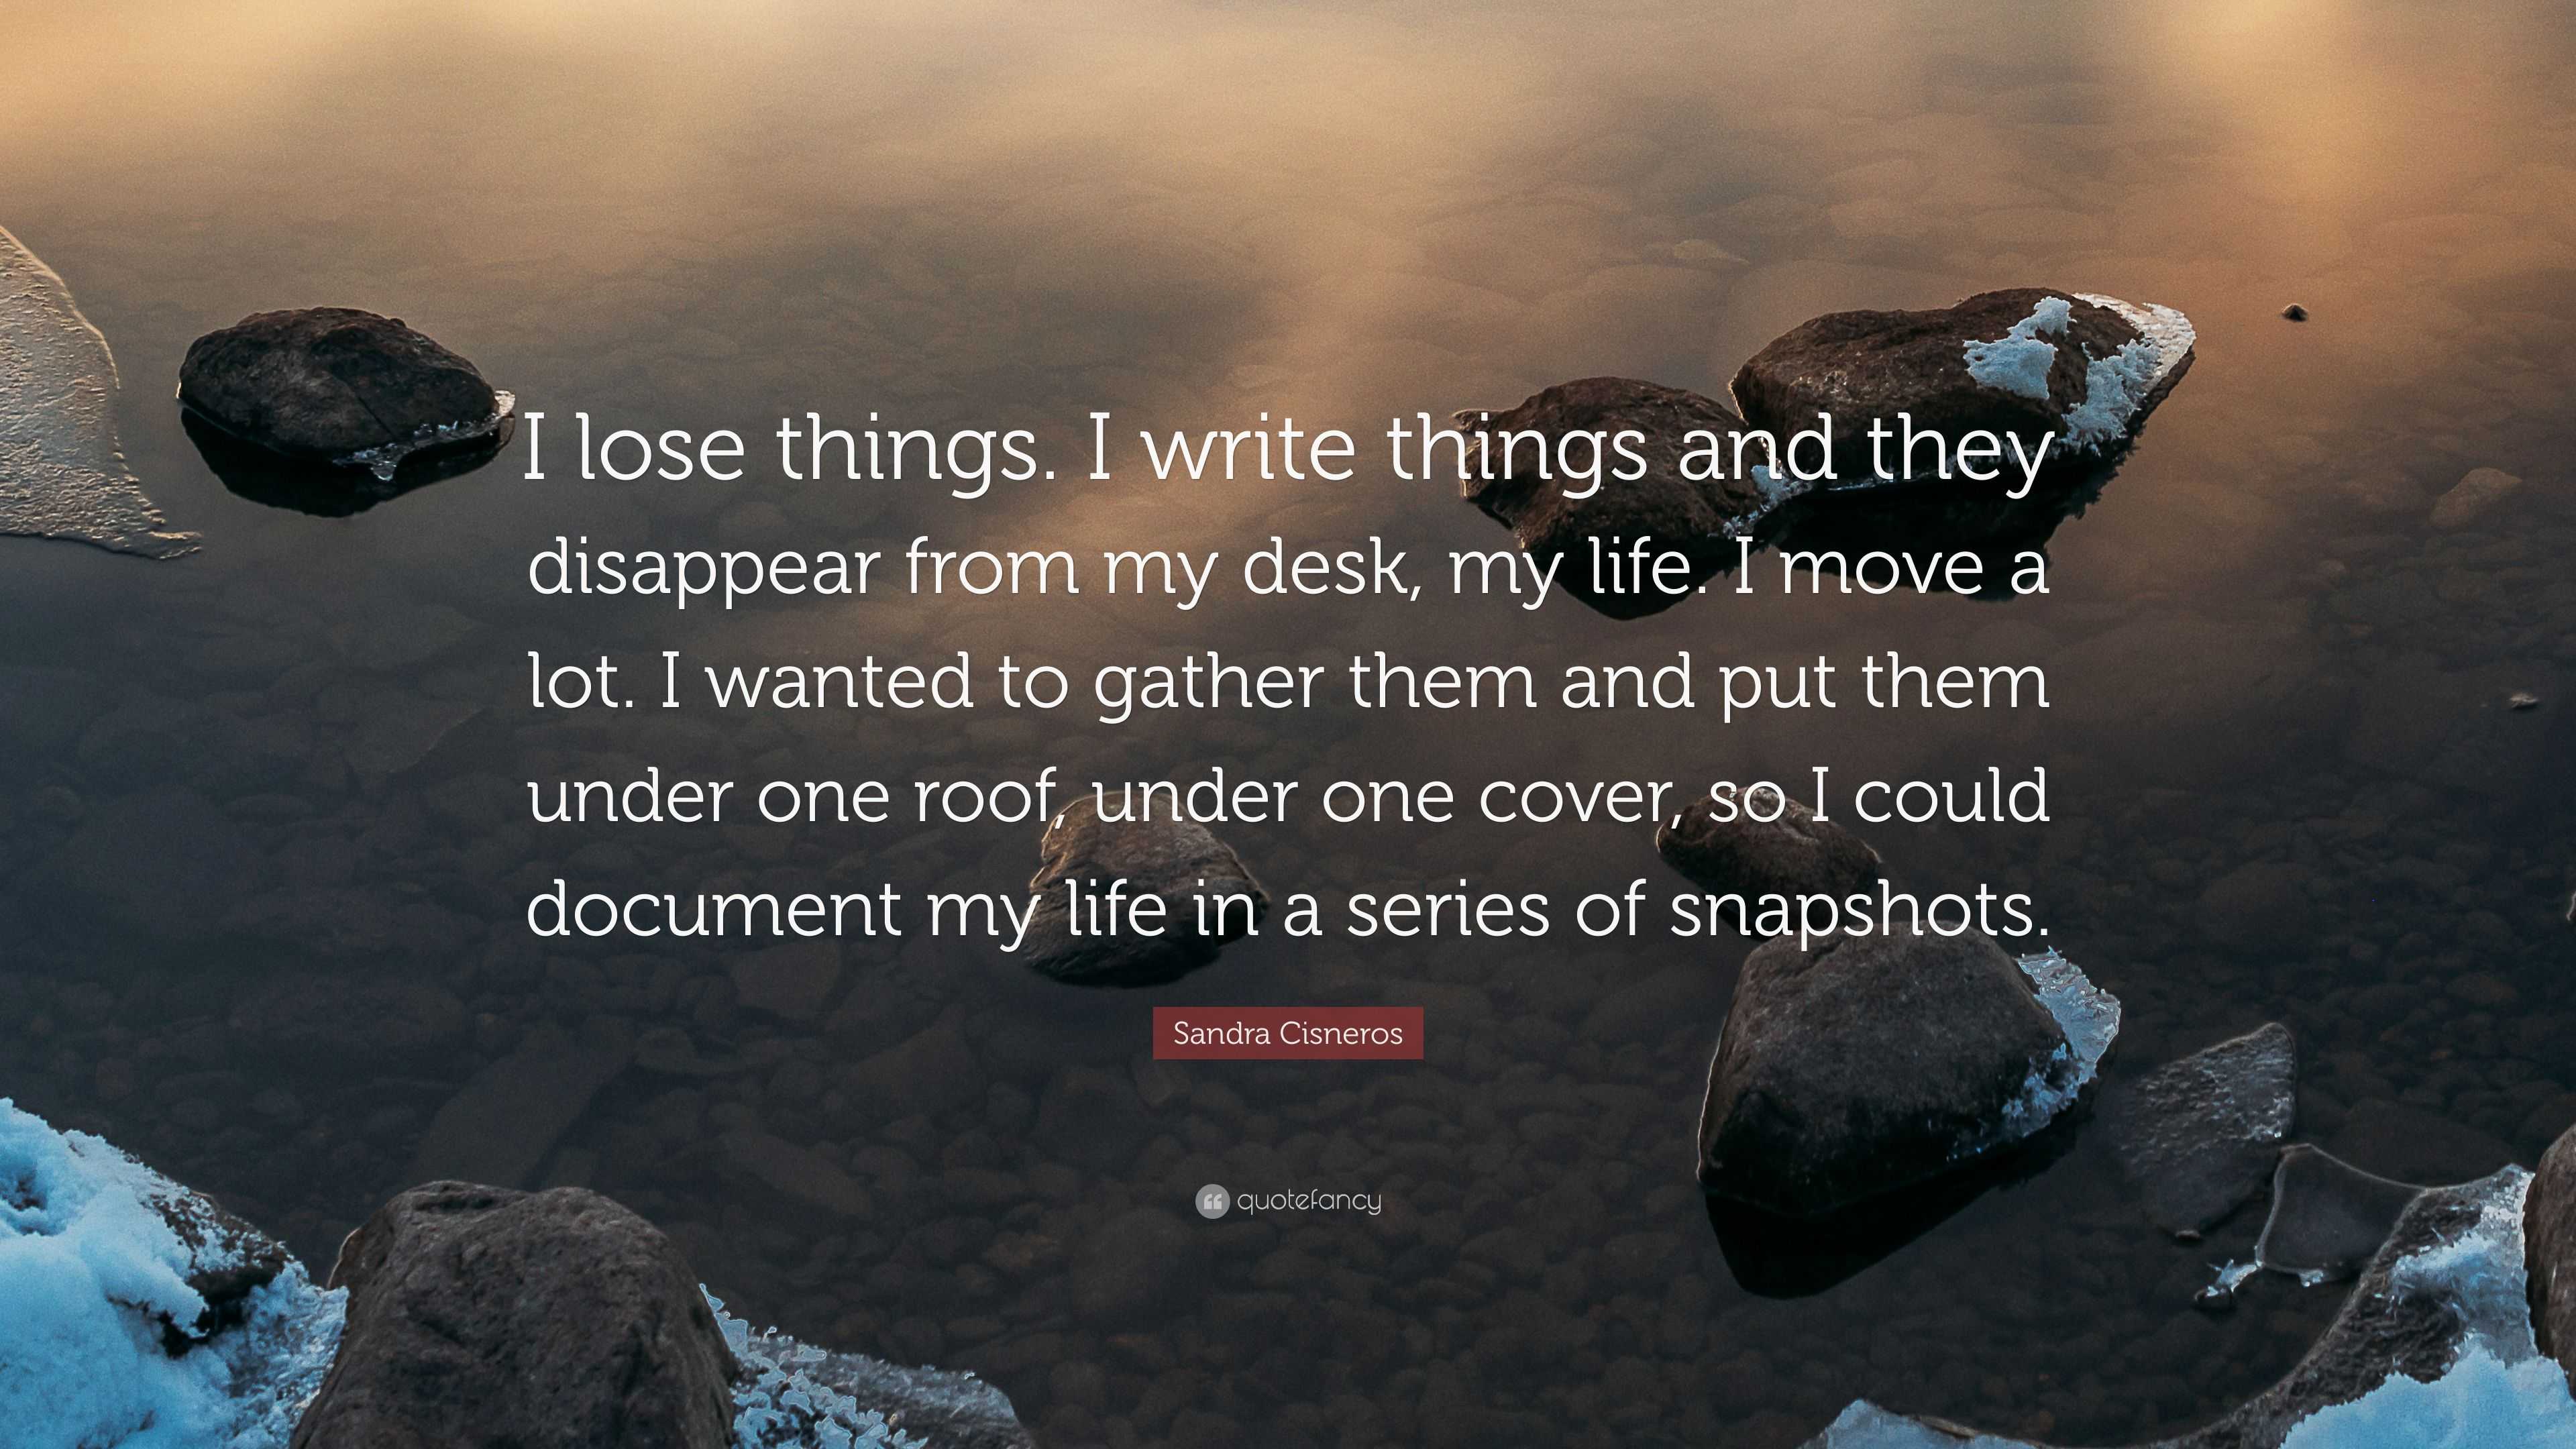 Sandra Cisneros Quote “I lose things I write things and they disappear from